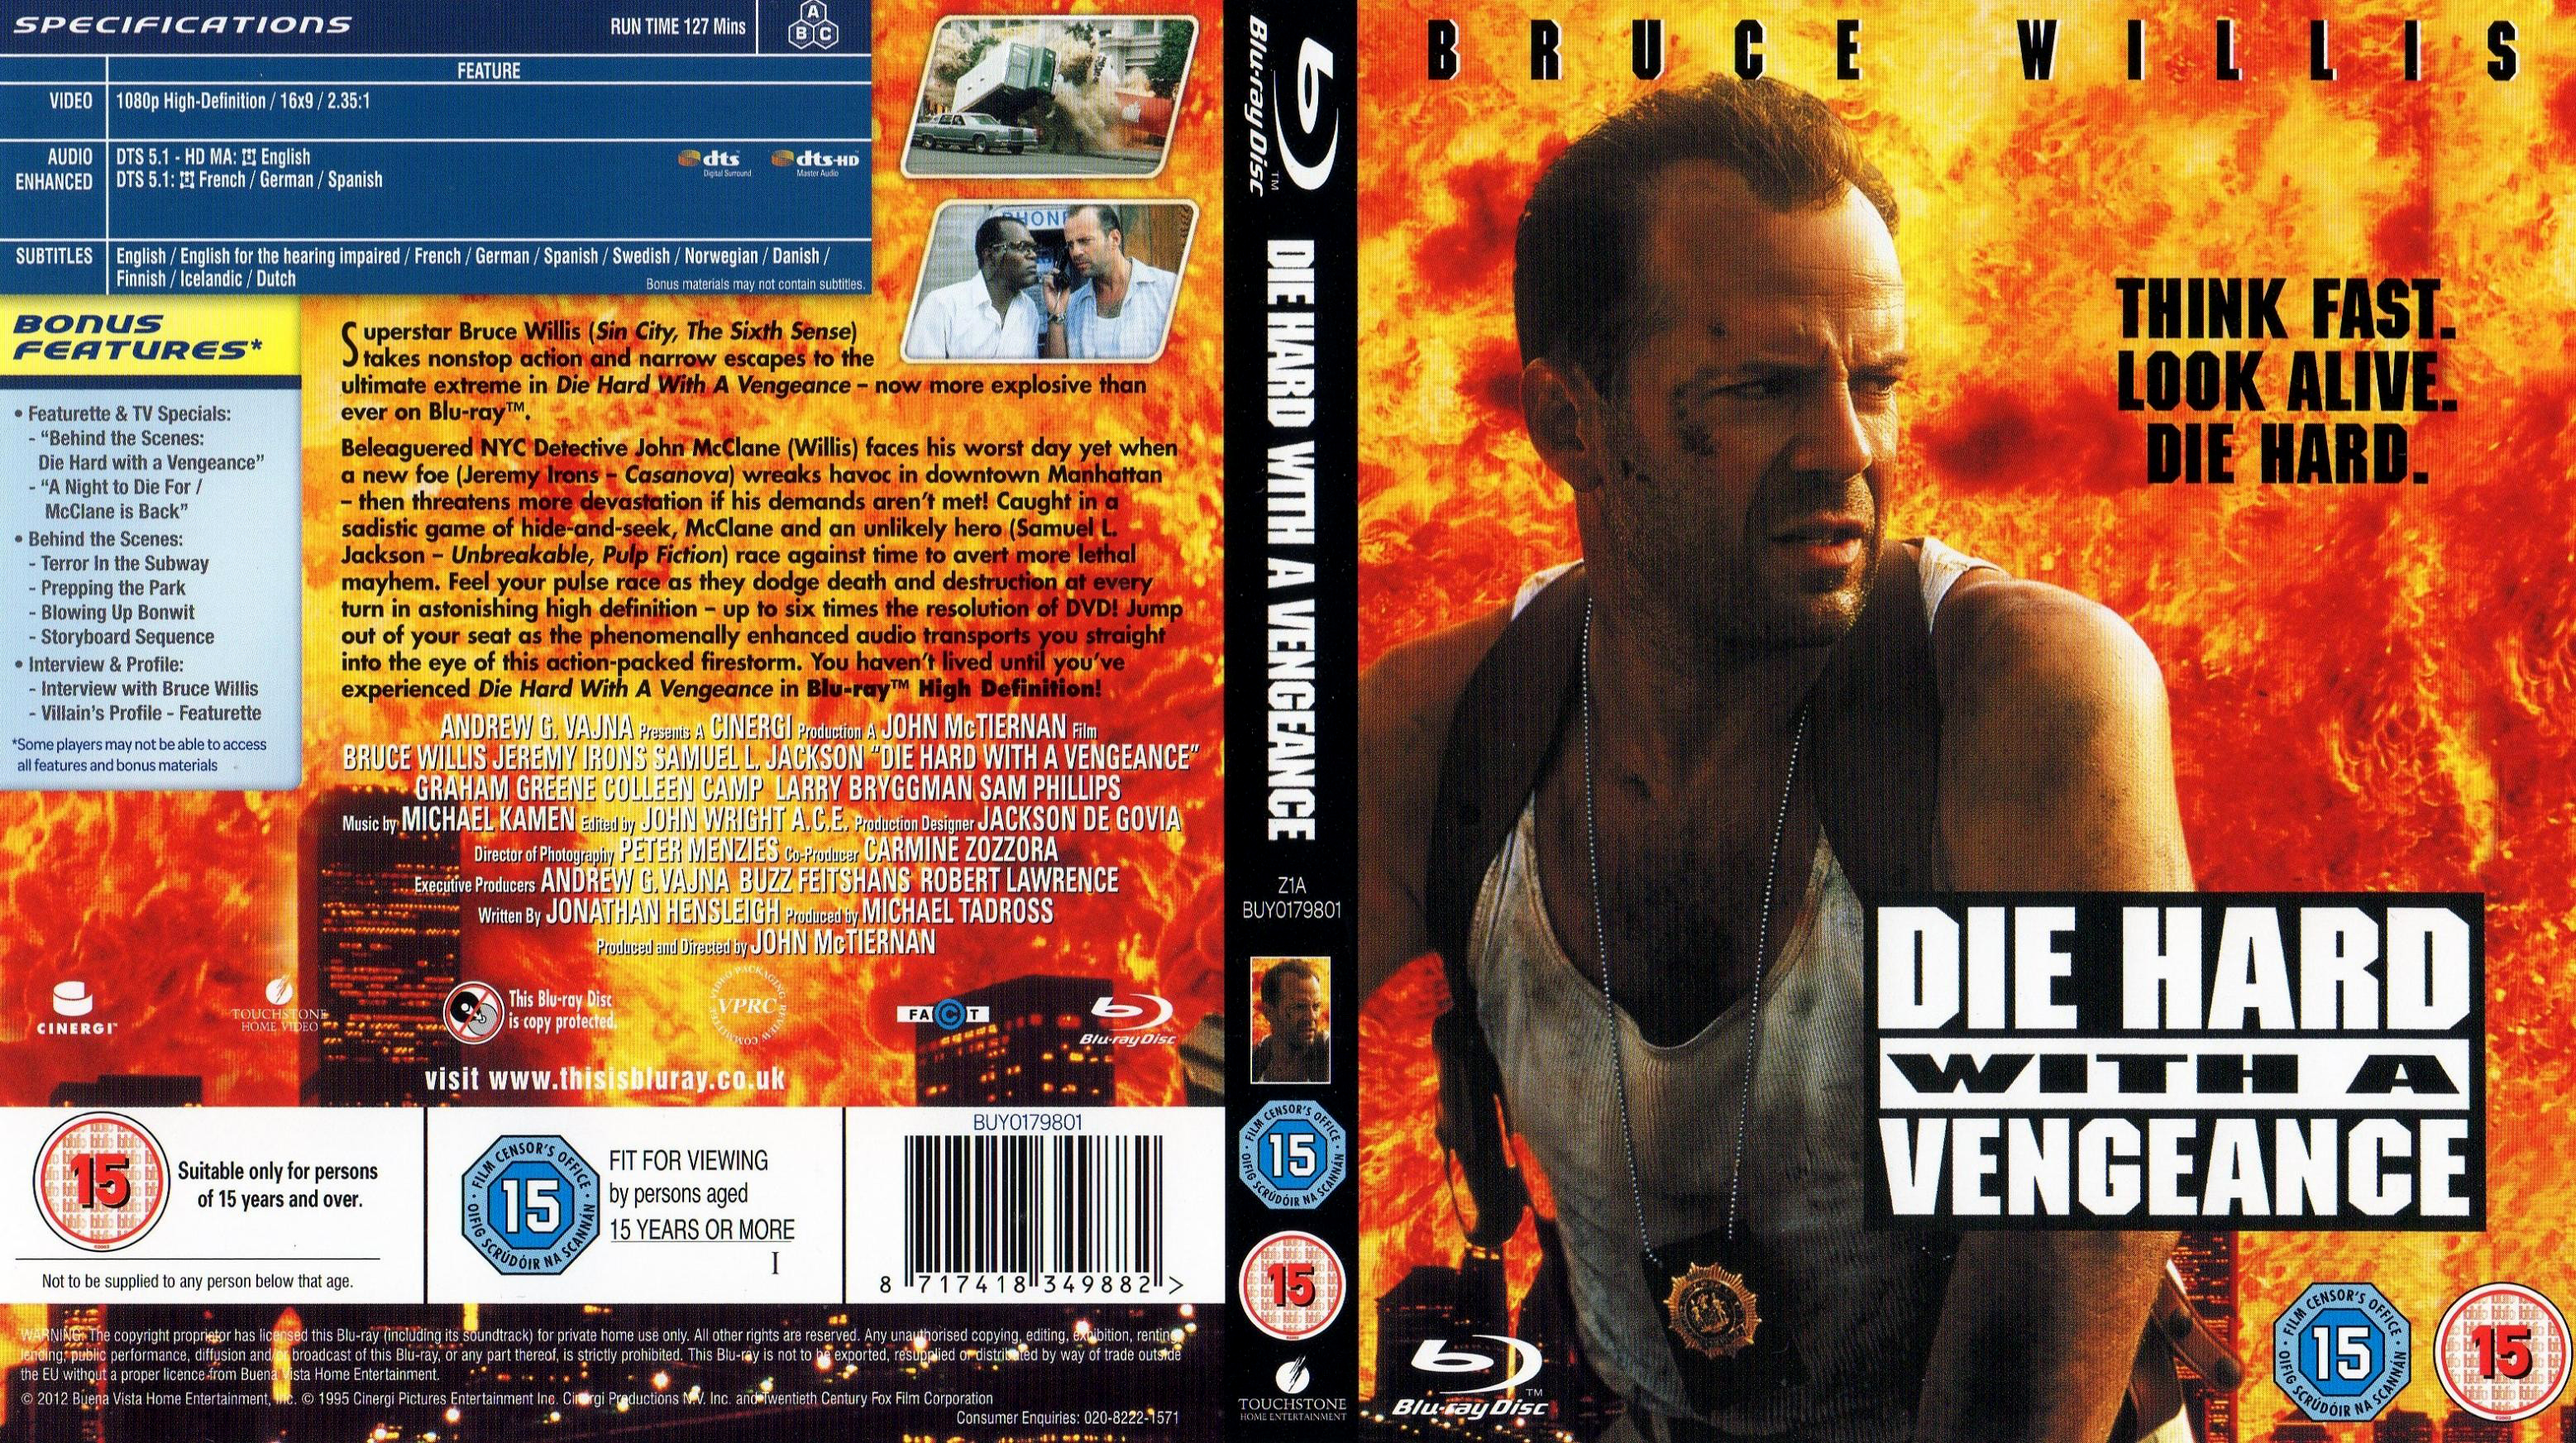 Die Hard With A Vengeance #9